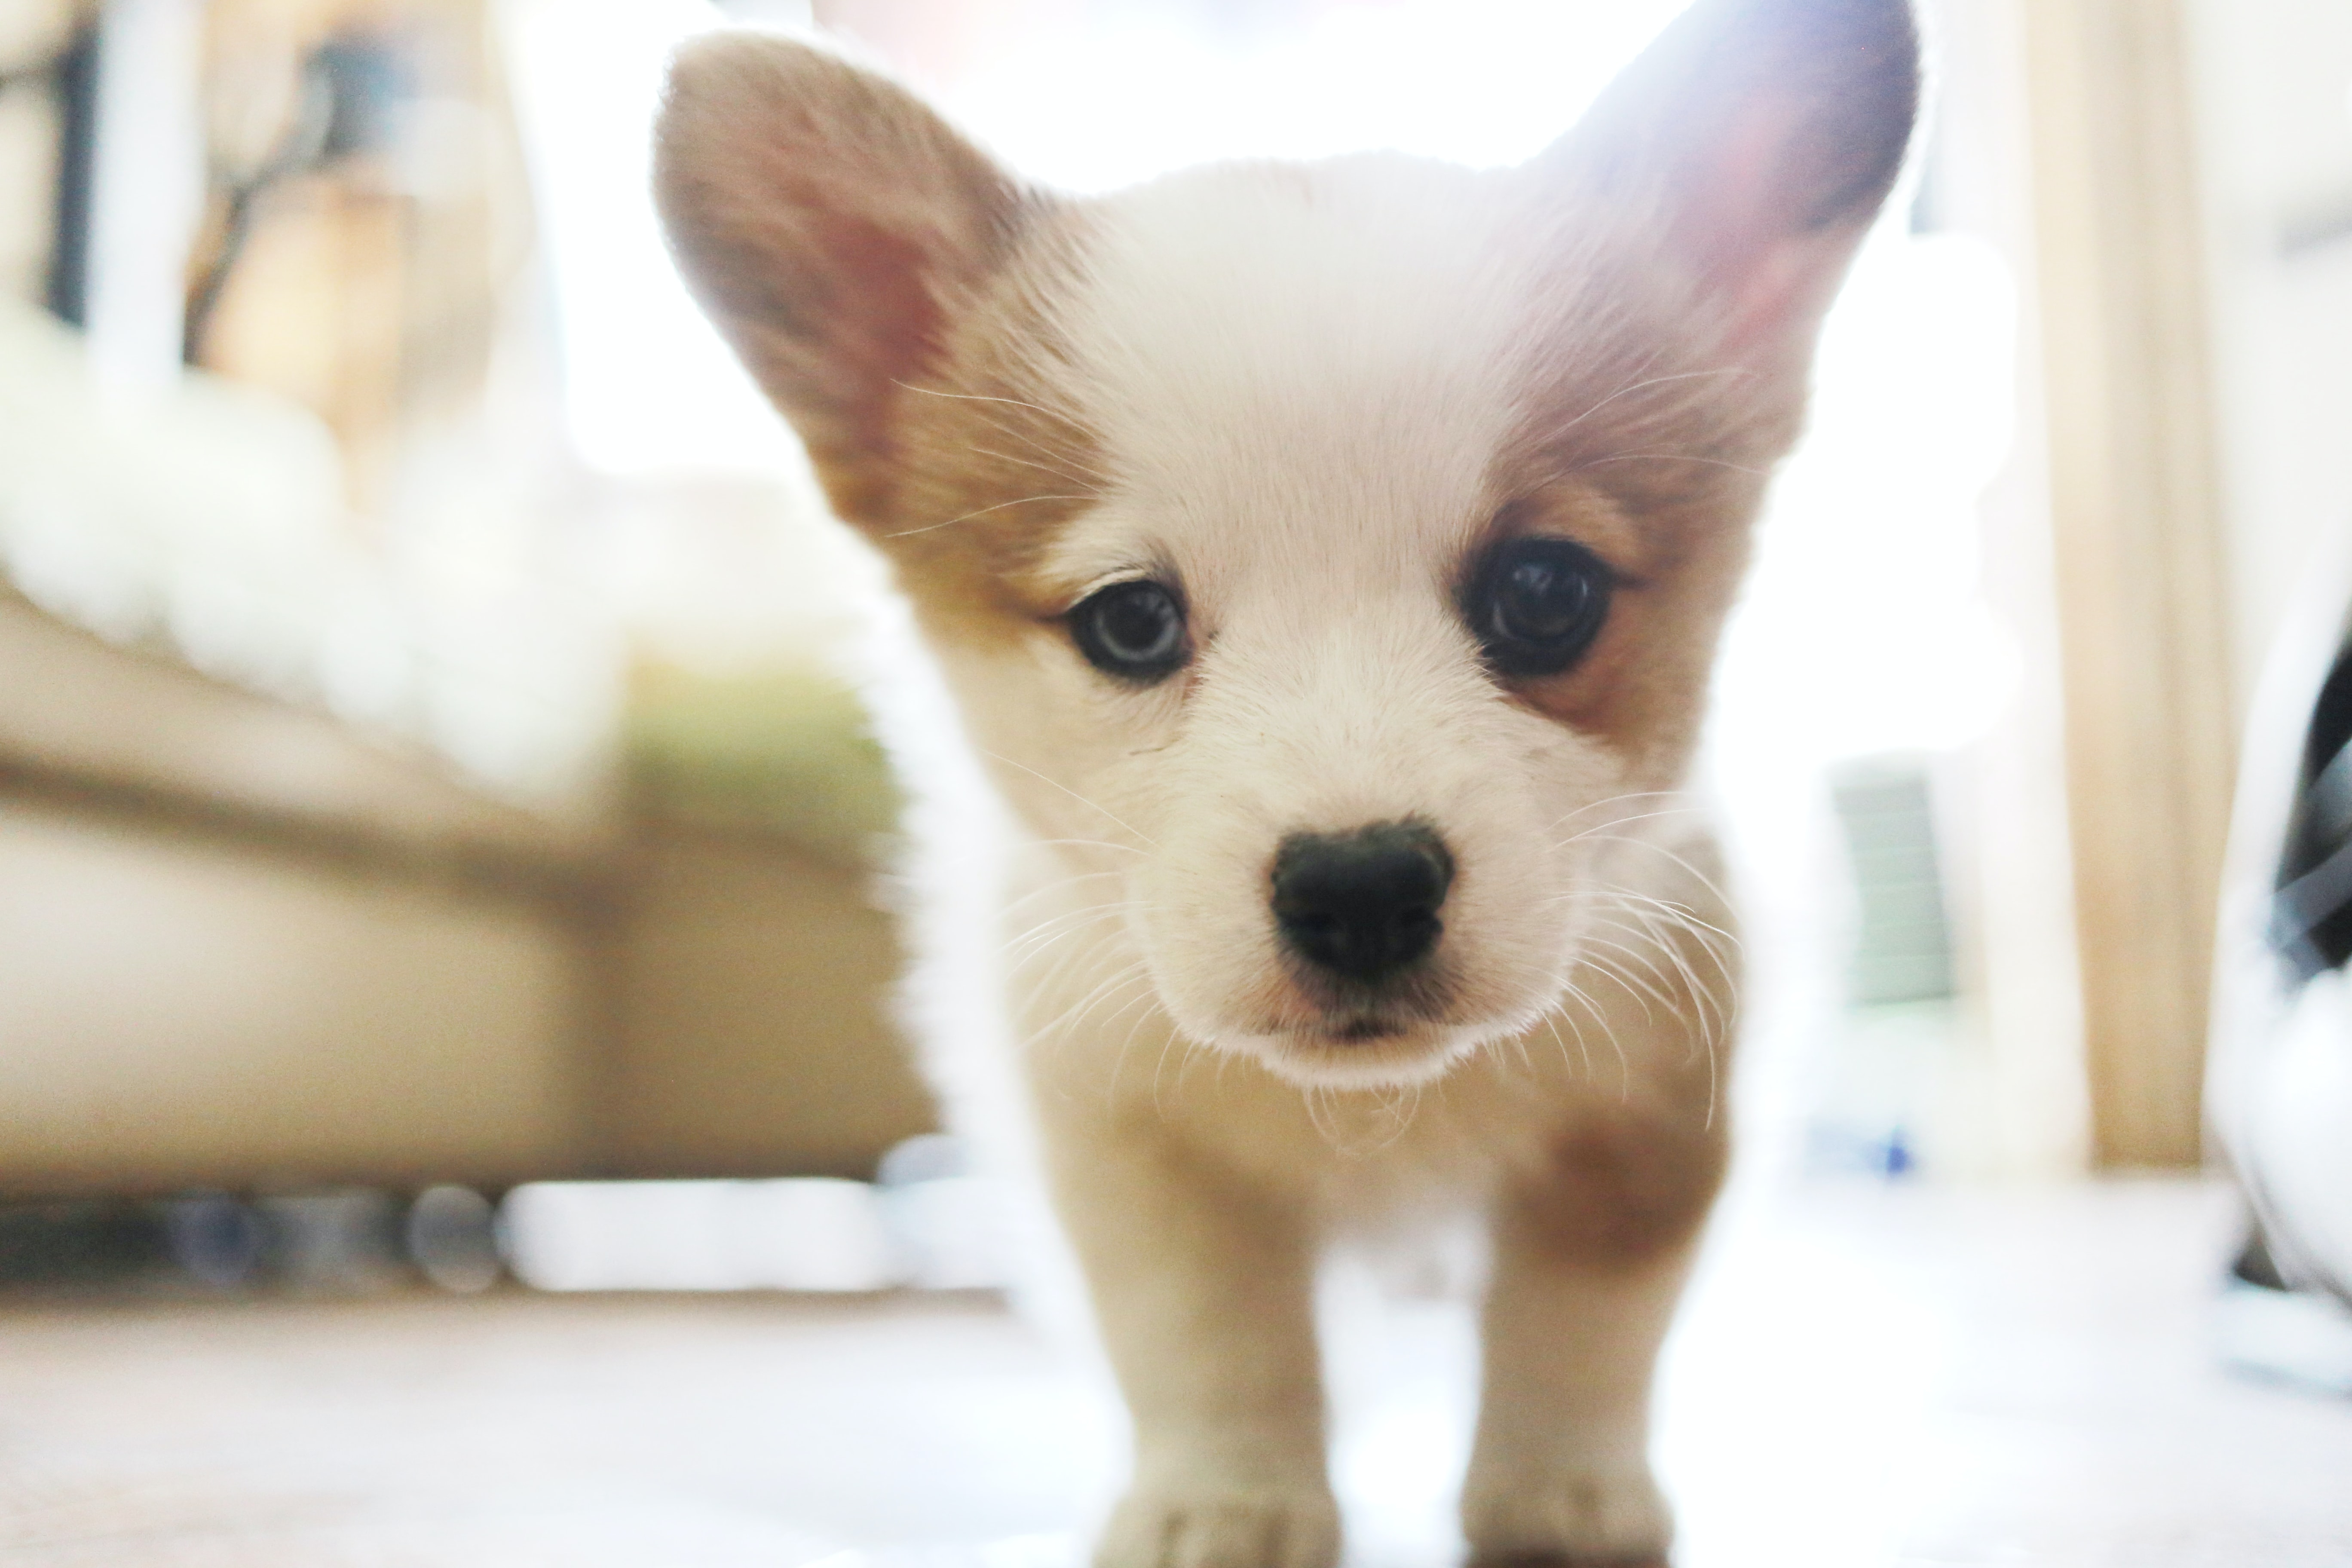 tan and white corgi puppy on a white floor looking at the camera